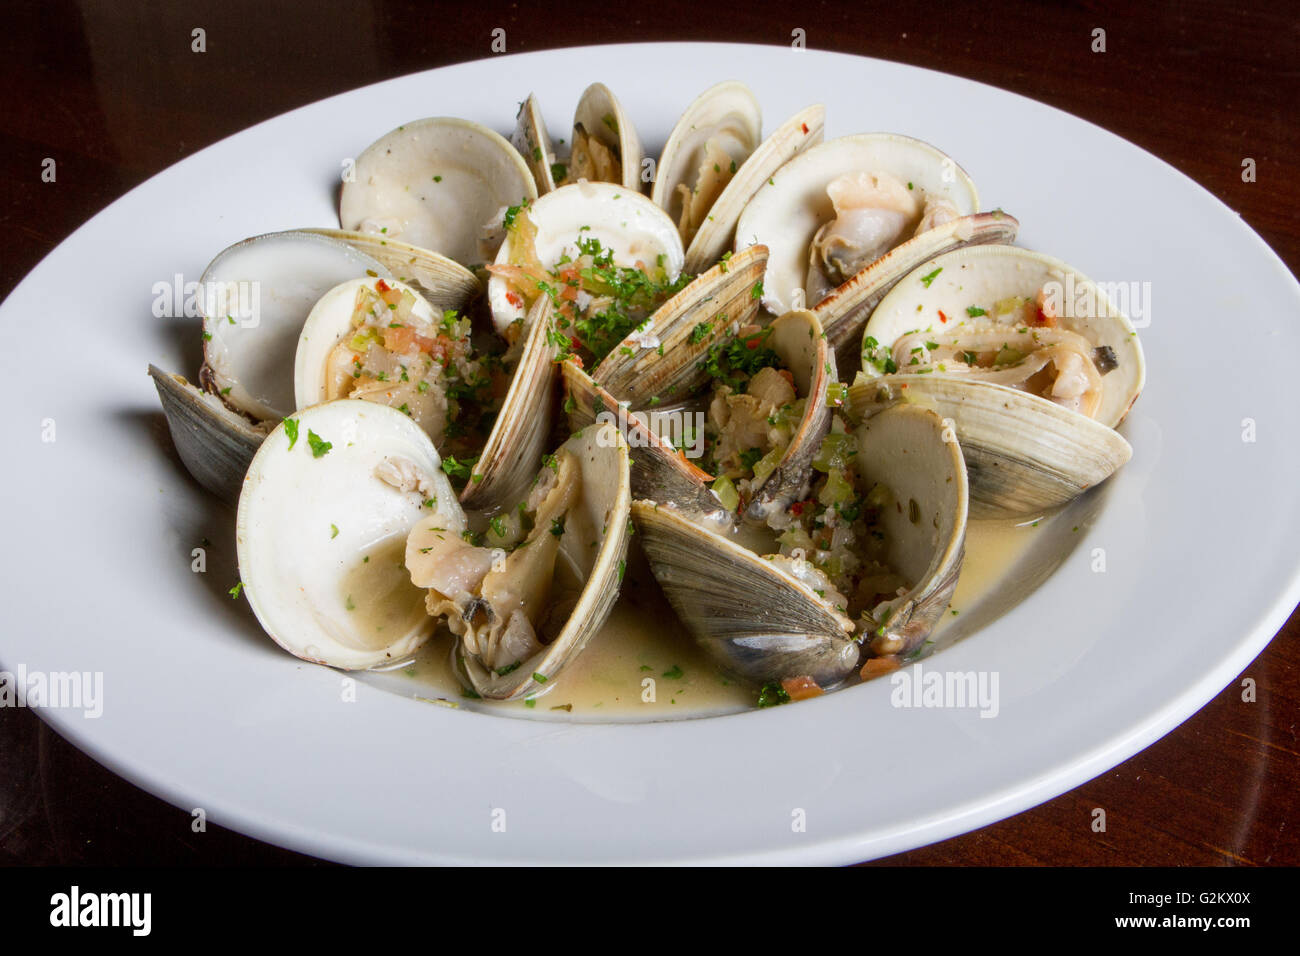 Bowl of Steamed Clams in White Sauce Stock Photo